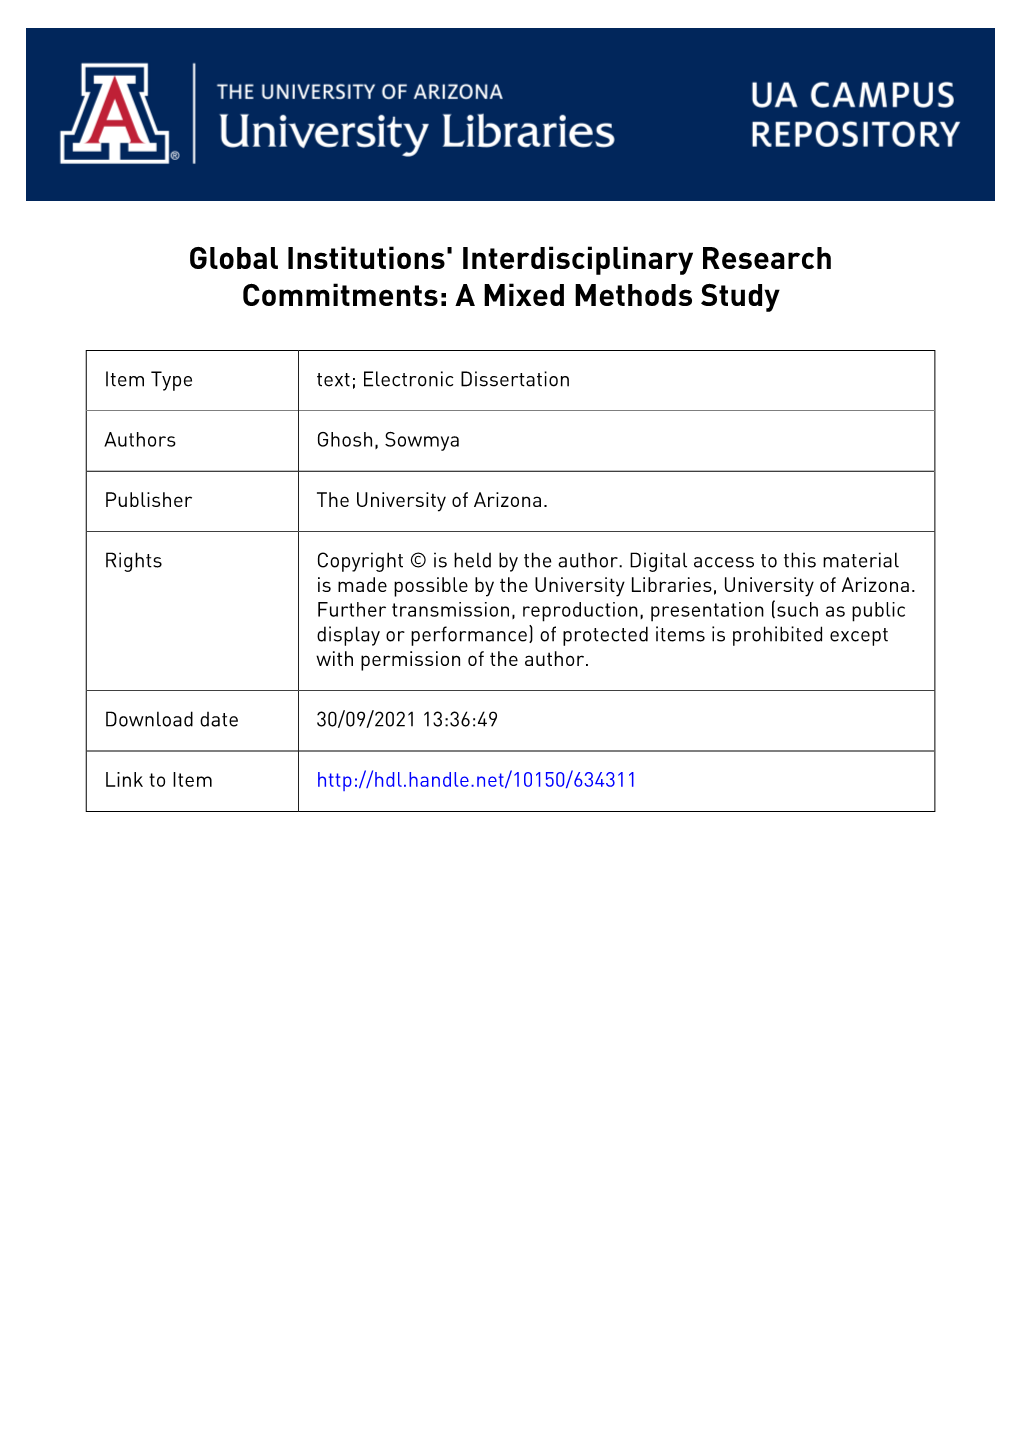 GLOBAL INSTITUTIONS' INTERDISCIPLINARY RESEARCH COMMITMENTS: a MIXED METHODS STUDY by Sowmya Ghosh